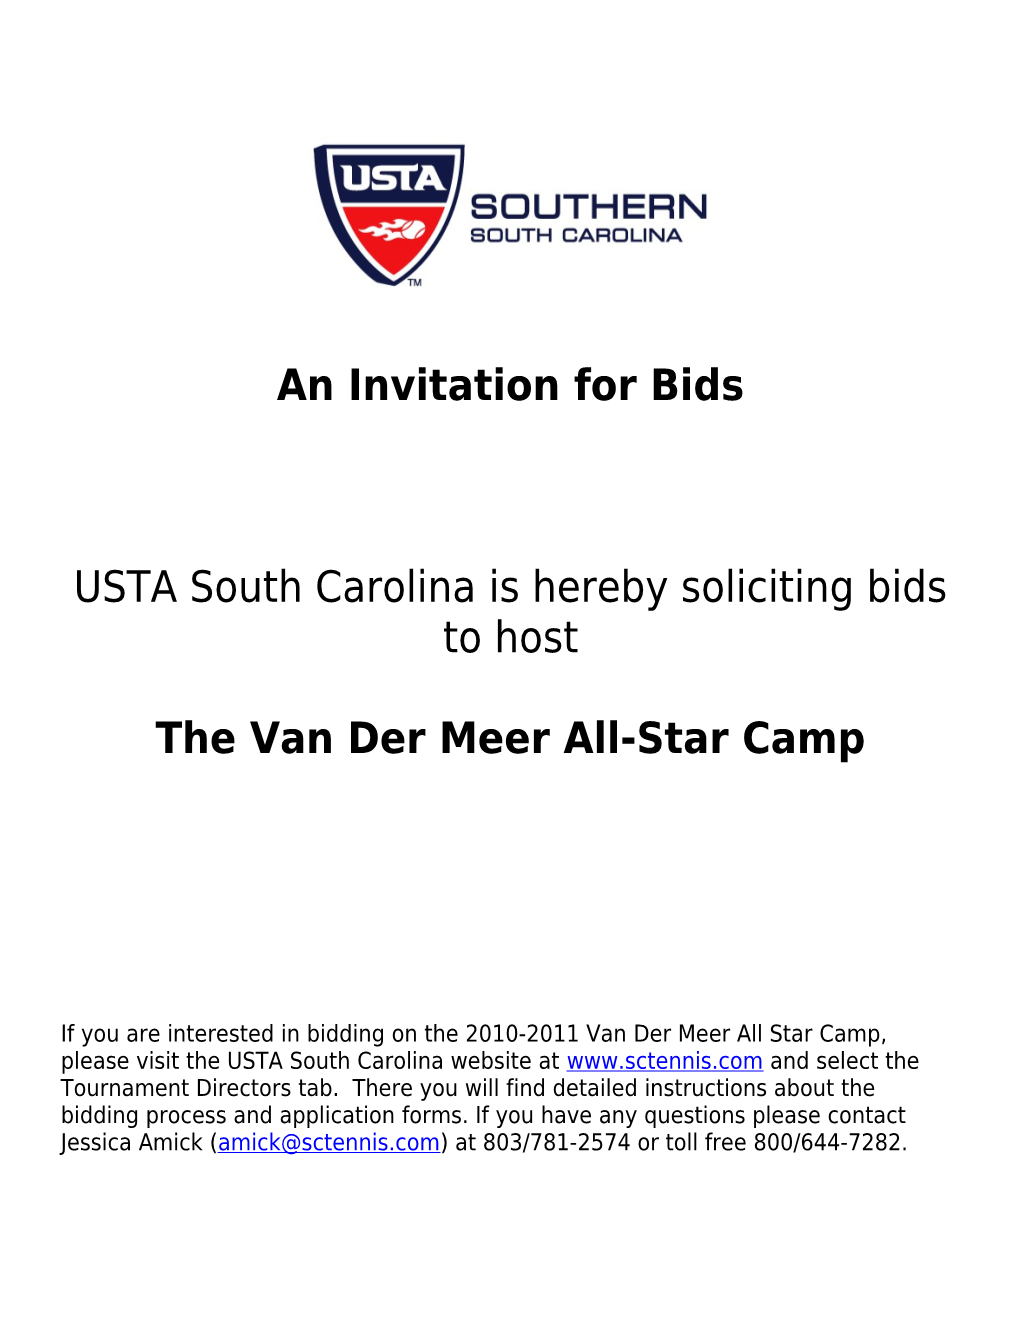 USTA South Carolina Is Hereby Soliciting Bids to Host